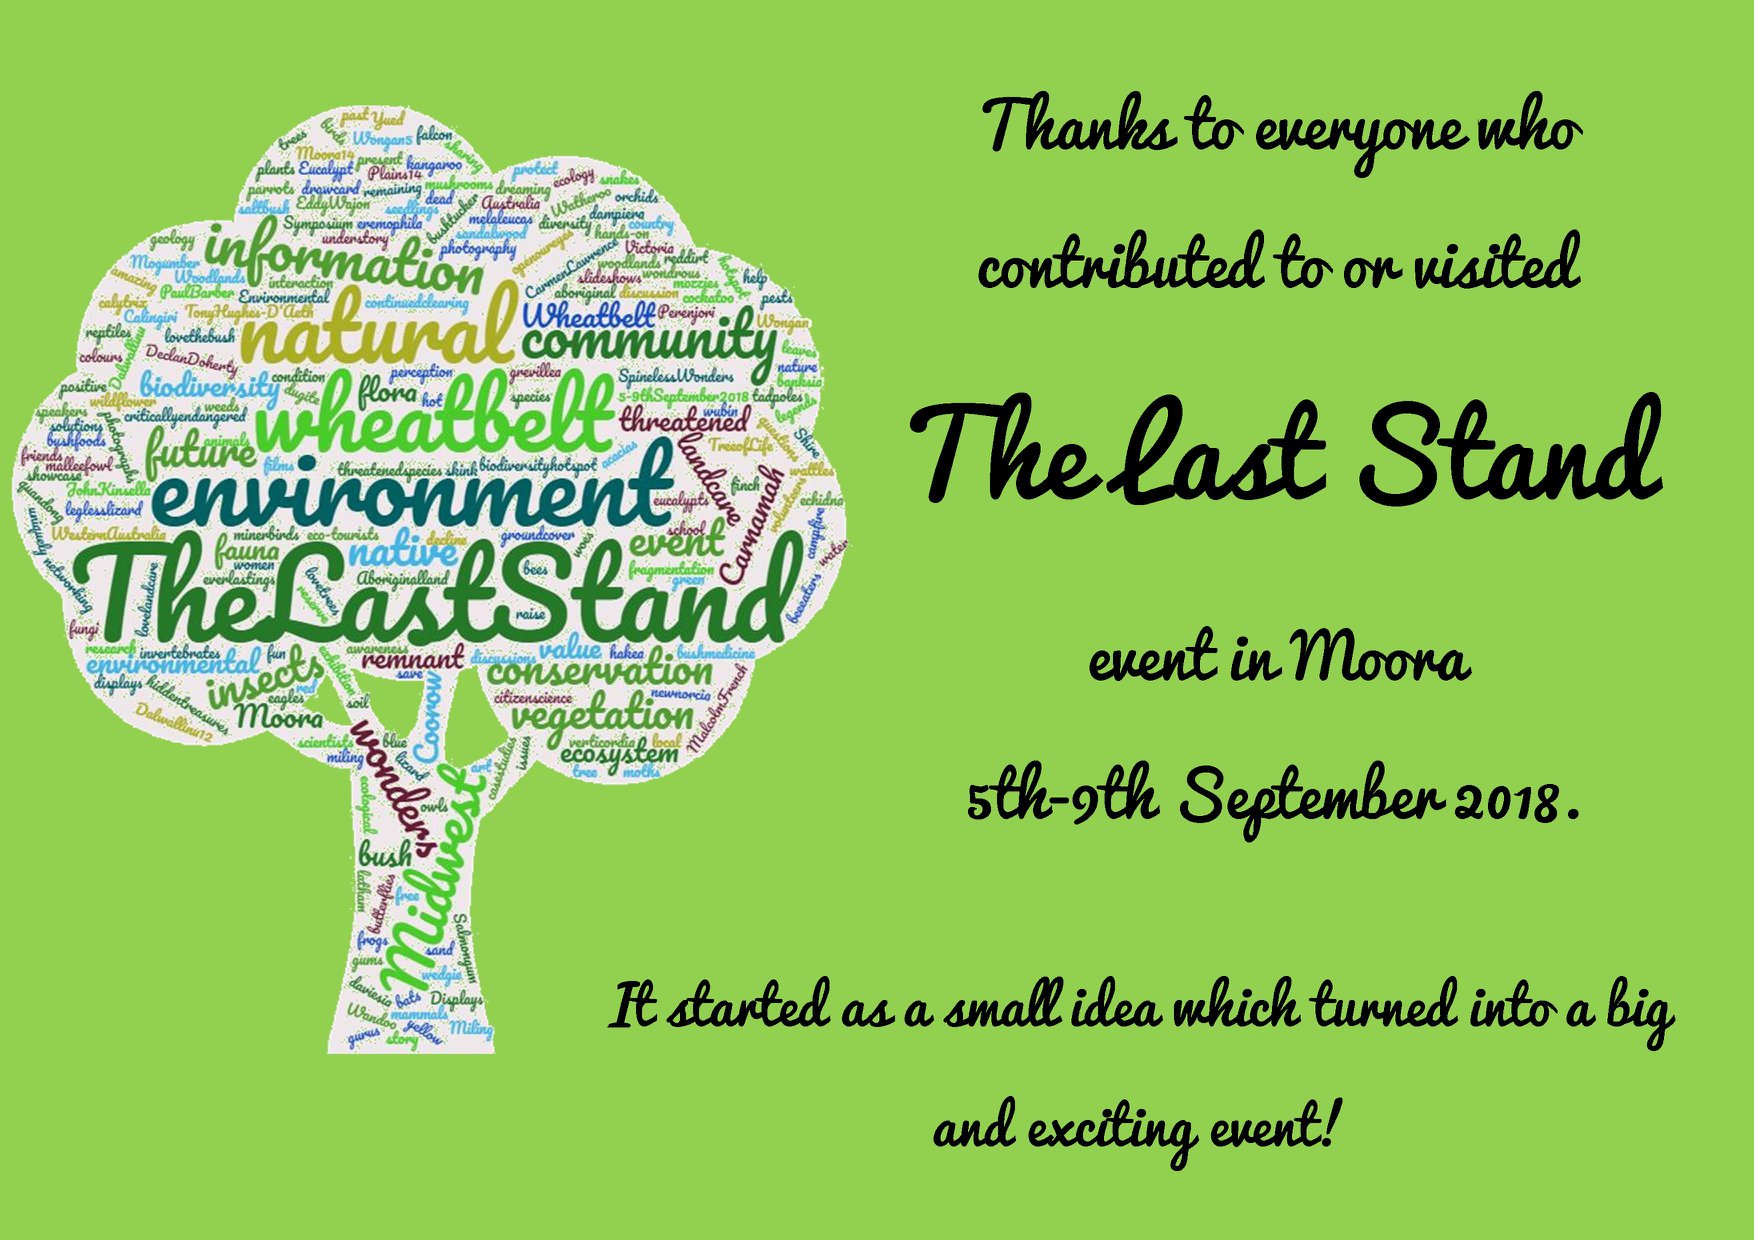 The Last Stand makes a stand for the environment